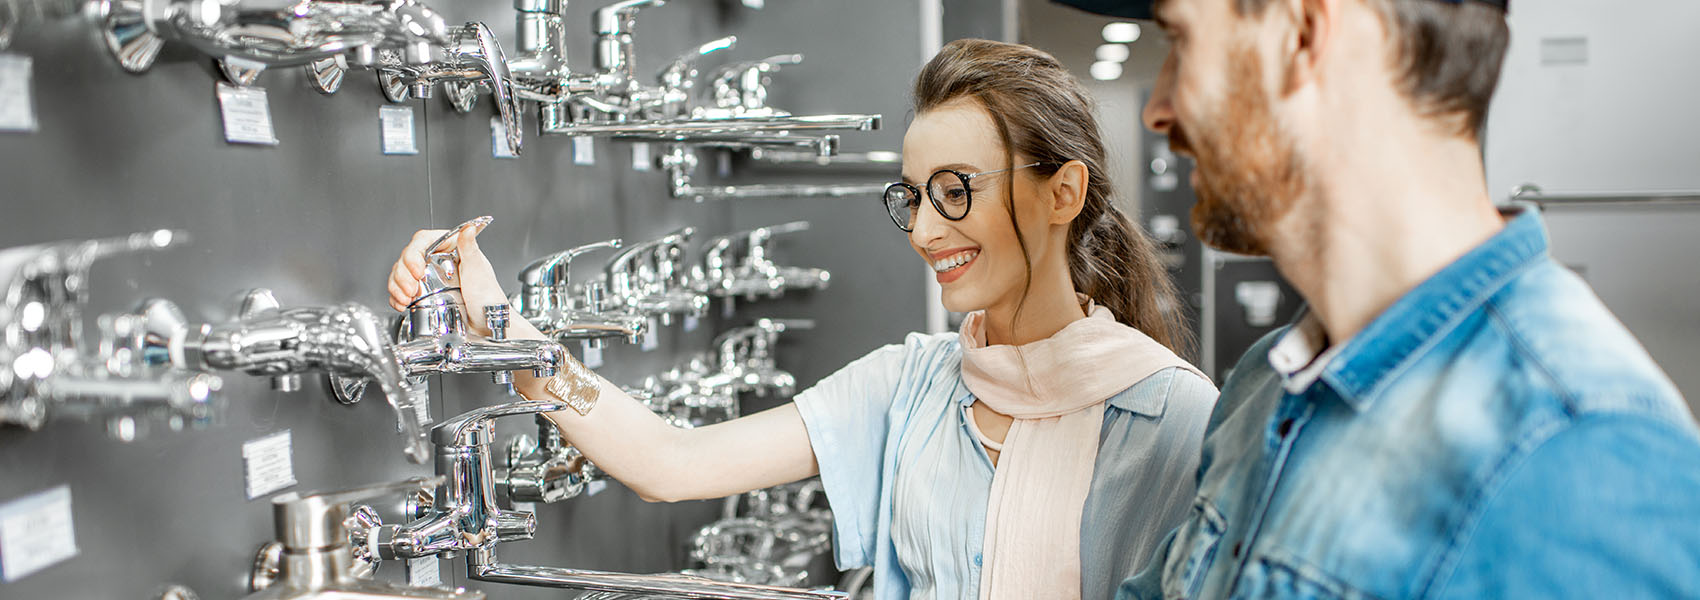 woman at a fixture shop trying out faucets